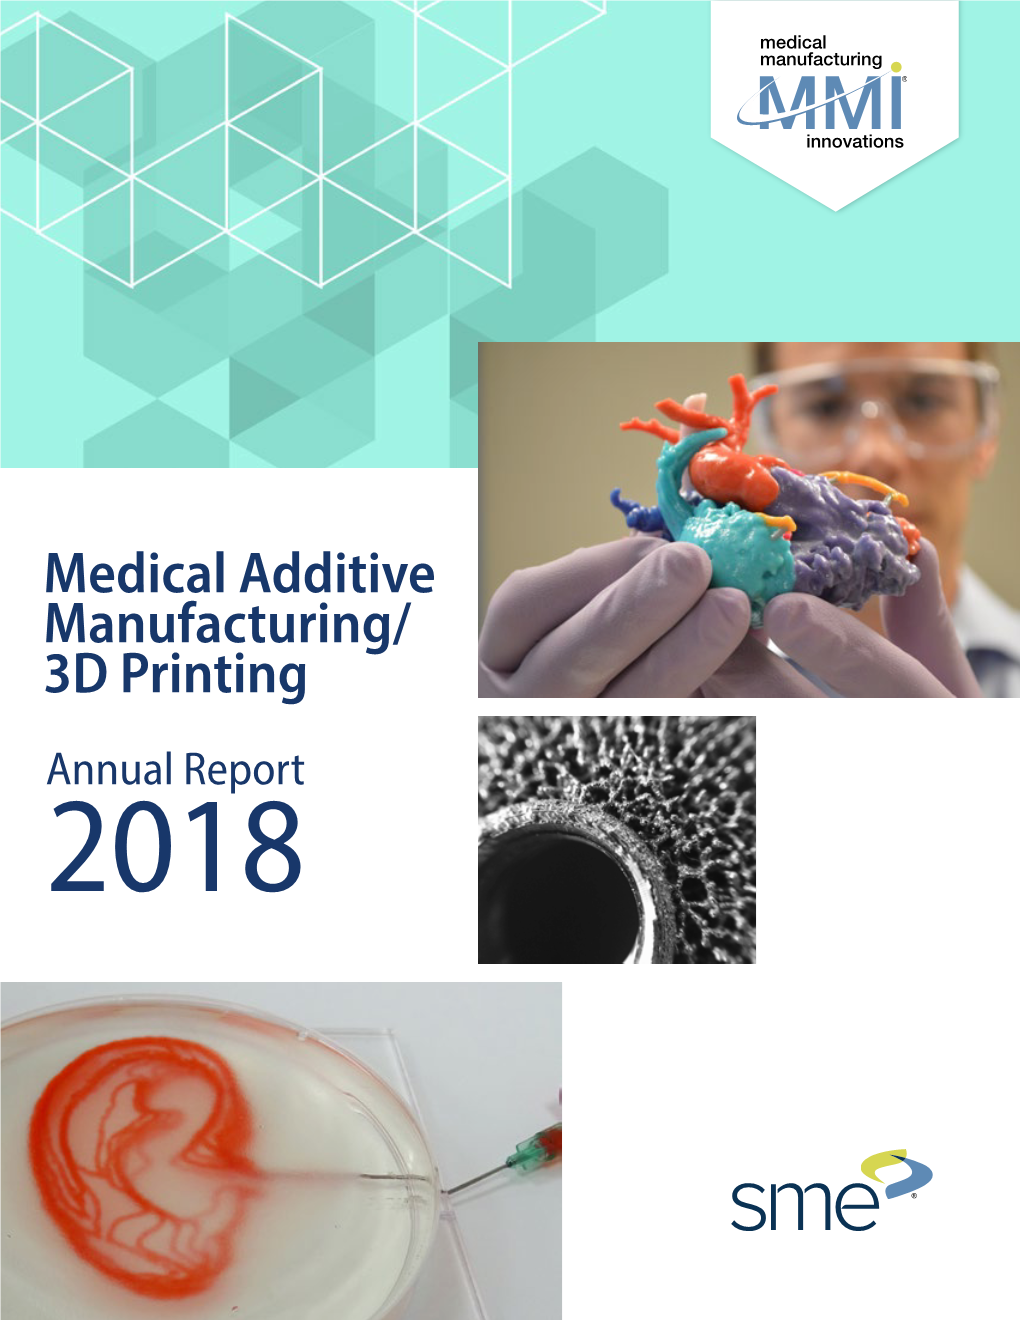 Medical Additive Manufacturing/ 3D Printing Annual Report 2018 Improving Public Health